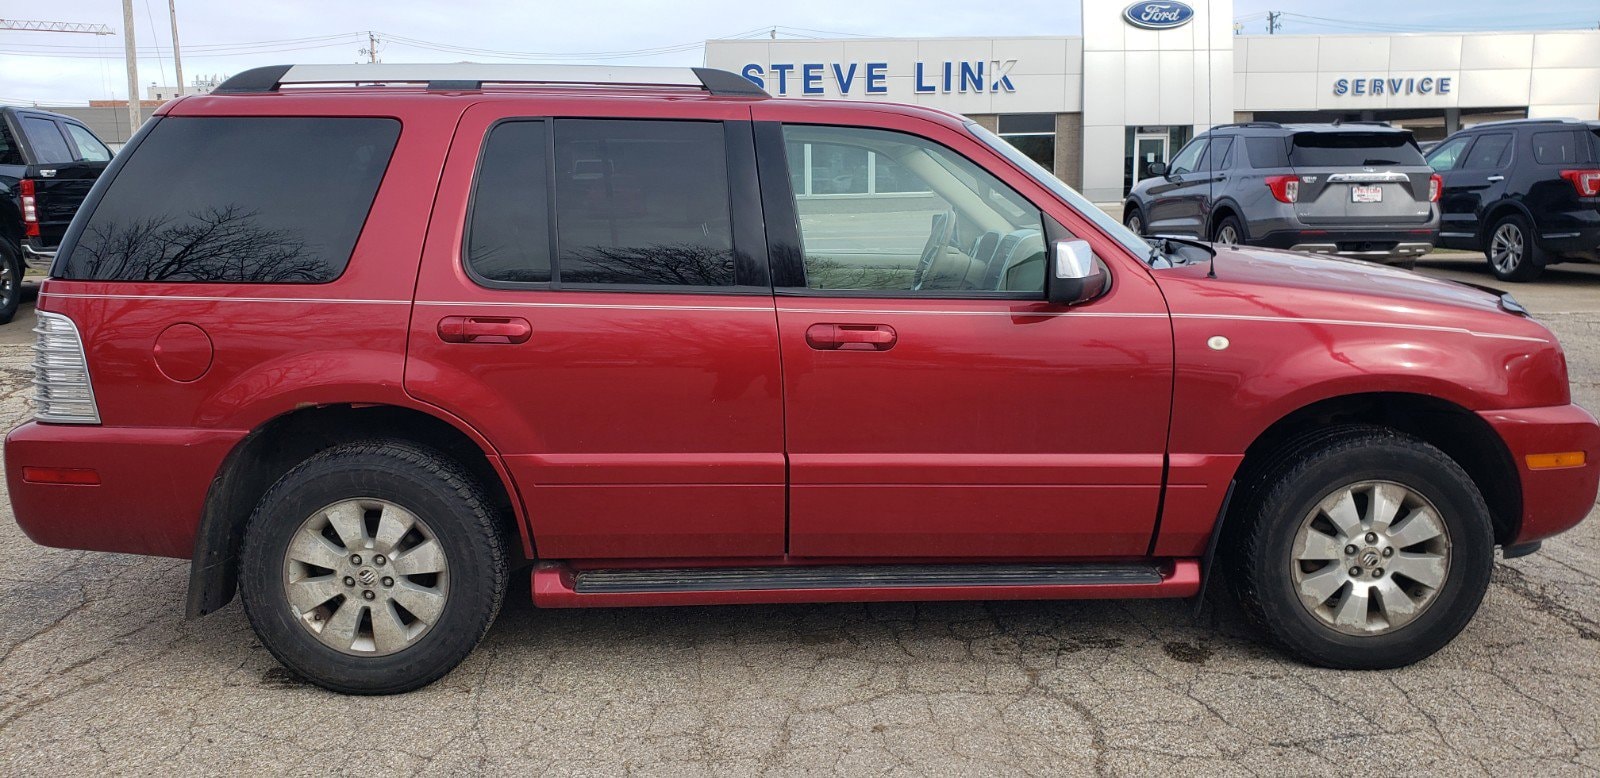 Used 2006 Mercury Mountaineer Premier with VIN 4M2EU48856UJ12719 for sale in Grinnell, IA